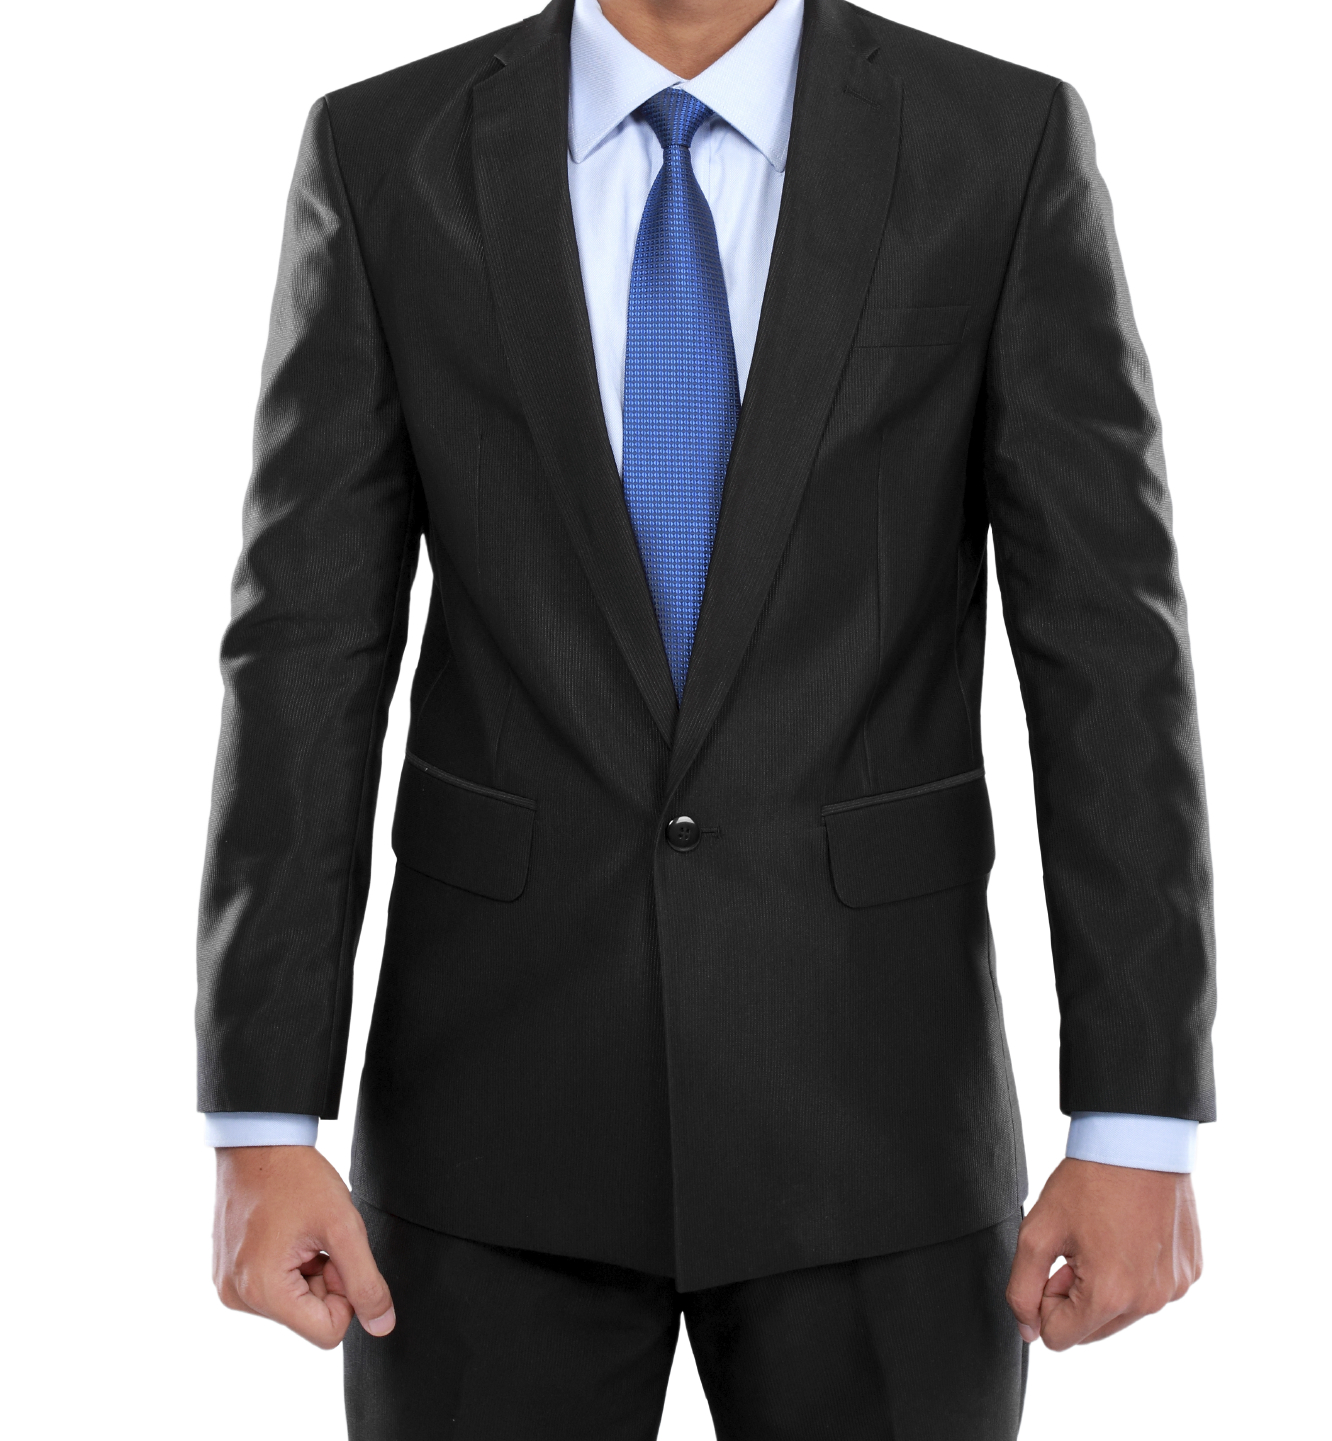 A Cleaner World Talks: How Often Should You Clean Your Suit?